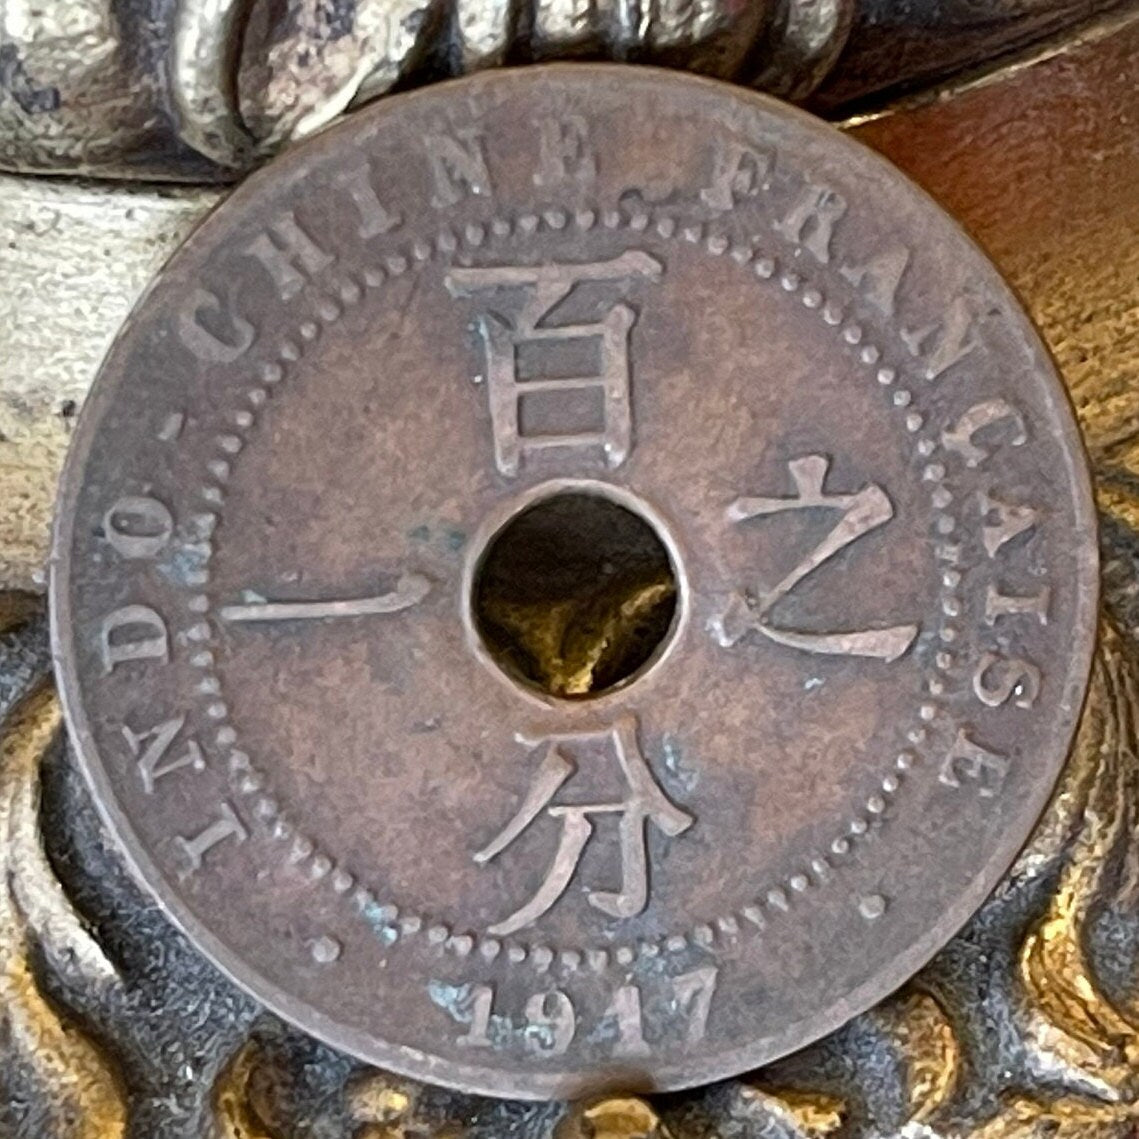 Imperialist Marianne 1 Cent French Indochina Authentic Coin Money for Jewelry (Vietnam) (Phrygian Cap) (Hole in Coin) (Chinese Characters)